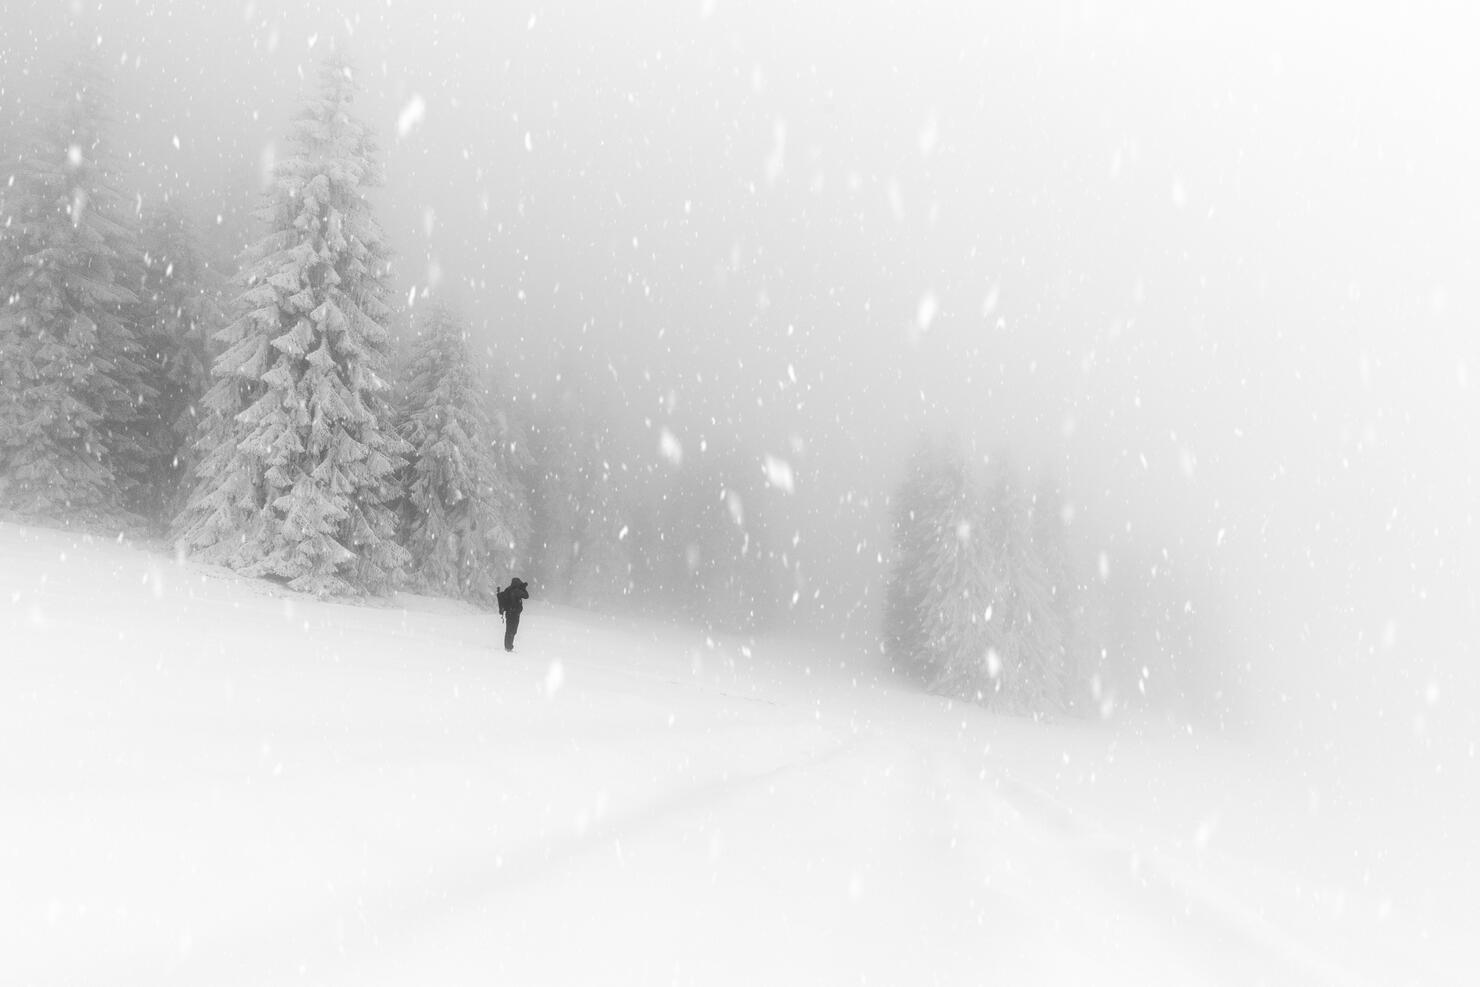 The Beauty Of Winter On The Snowy Mountains In Black And White. Rodnei Mountains, Romania